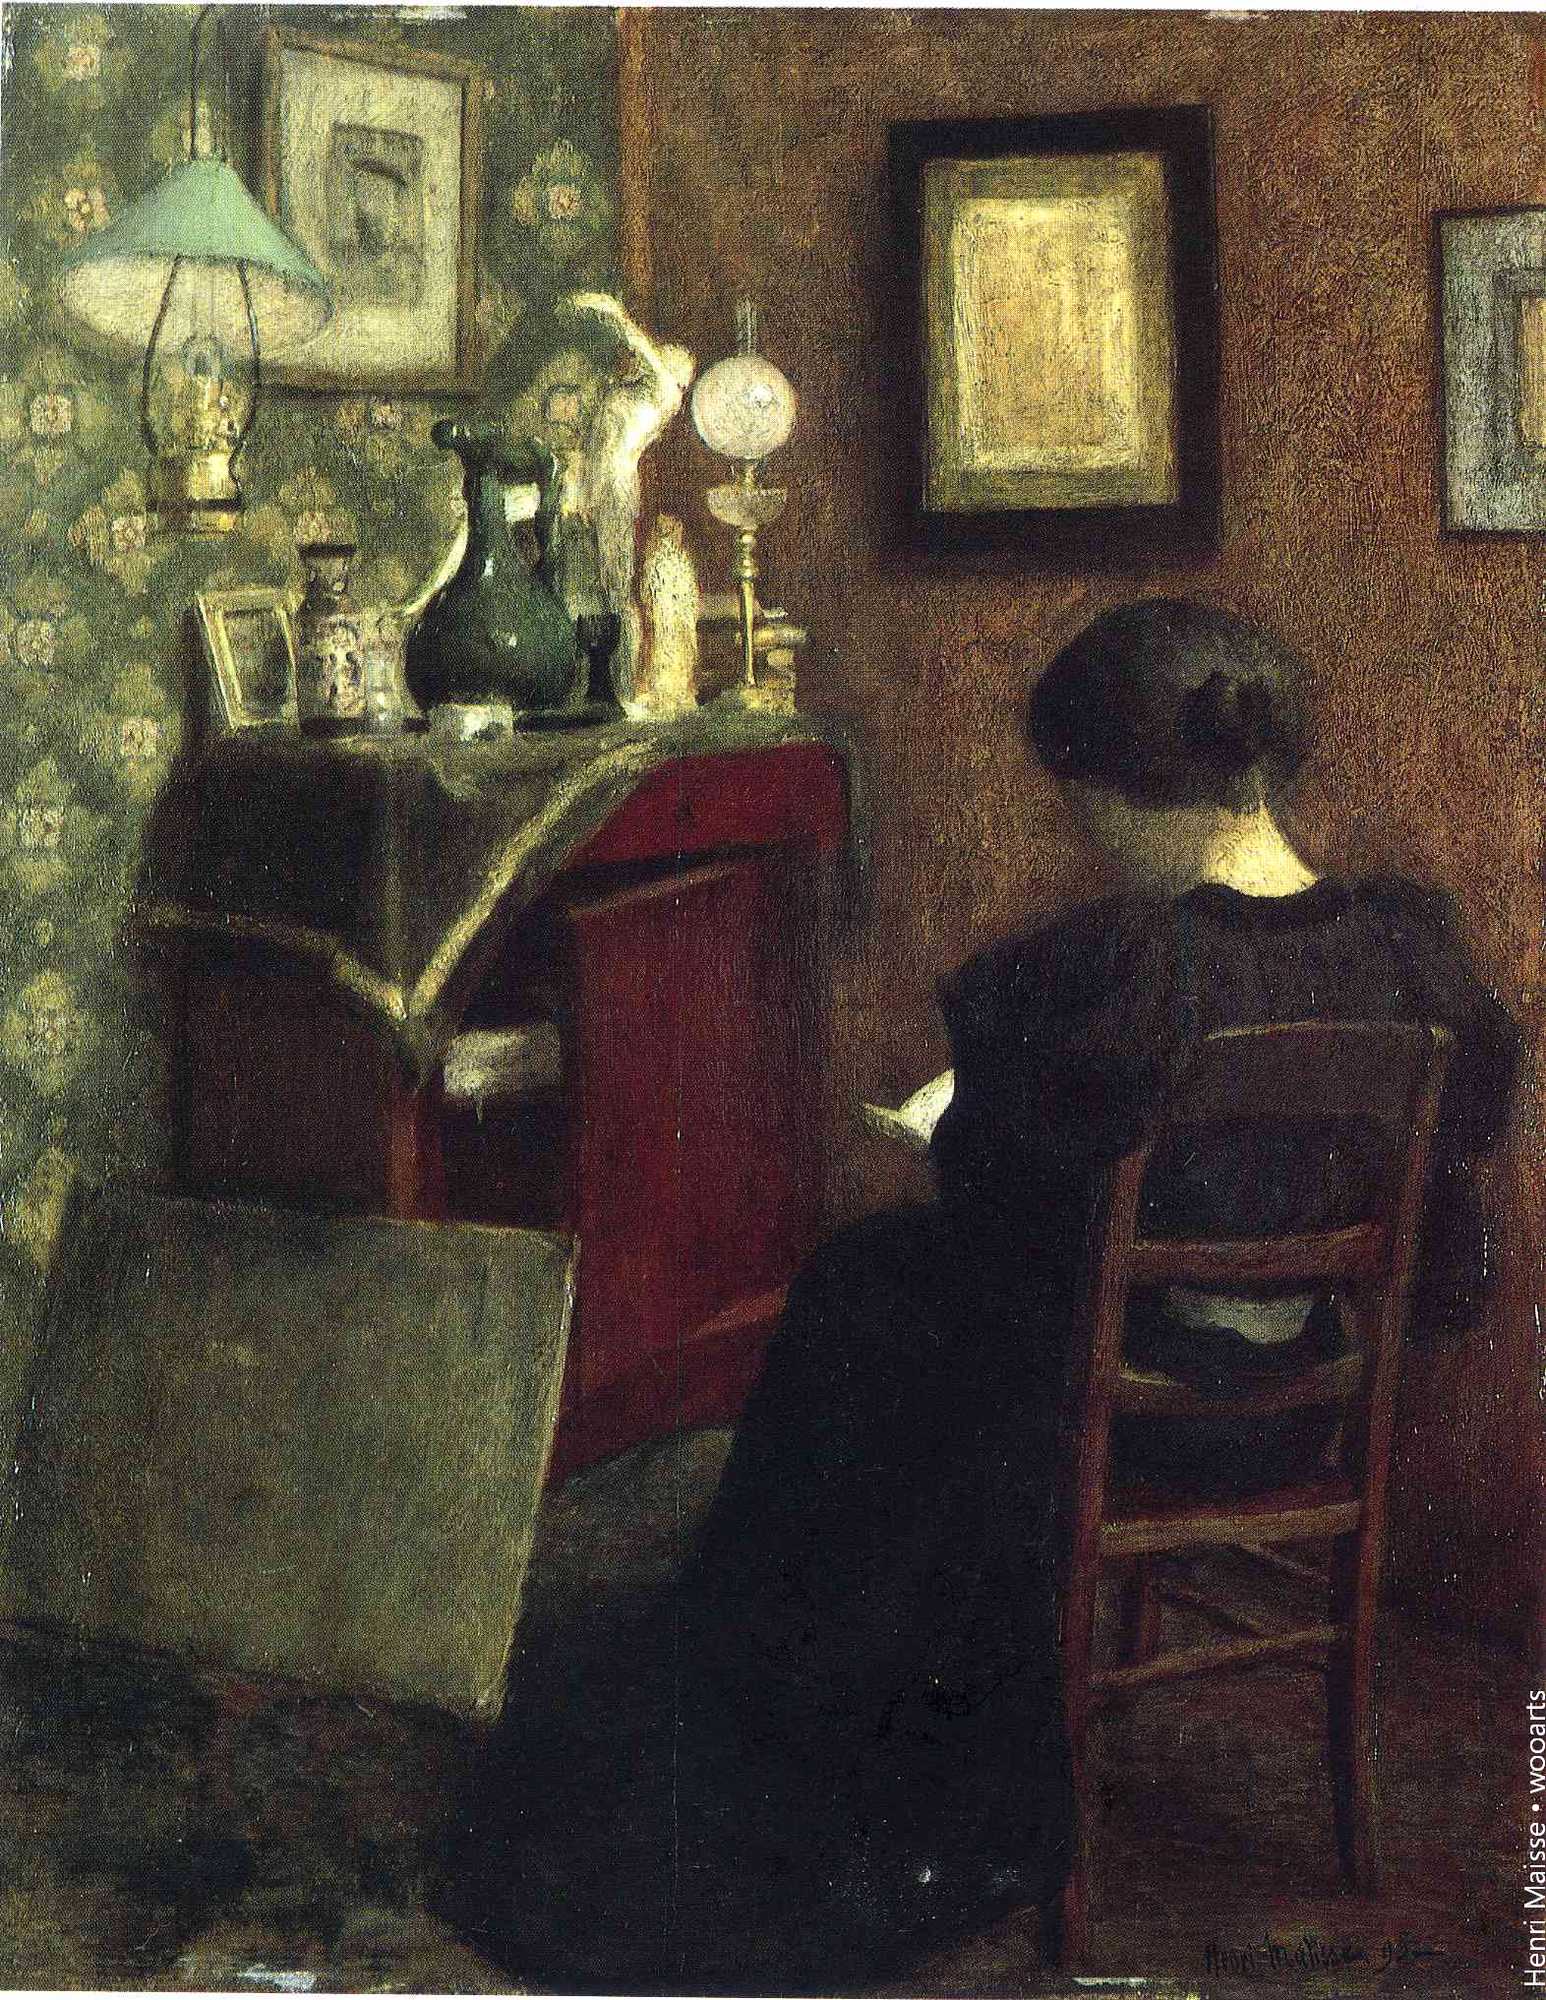 Henri Matisse Setting Painting Woman Reading, 1894, oil on canvas, Musée National d